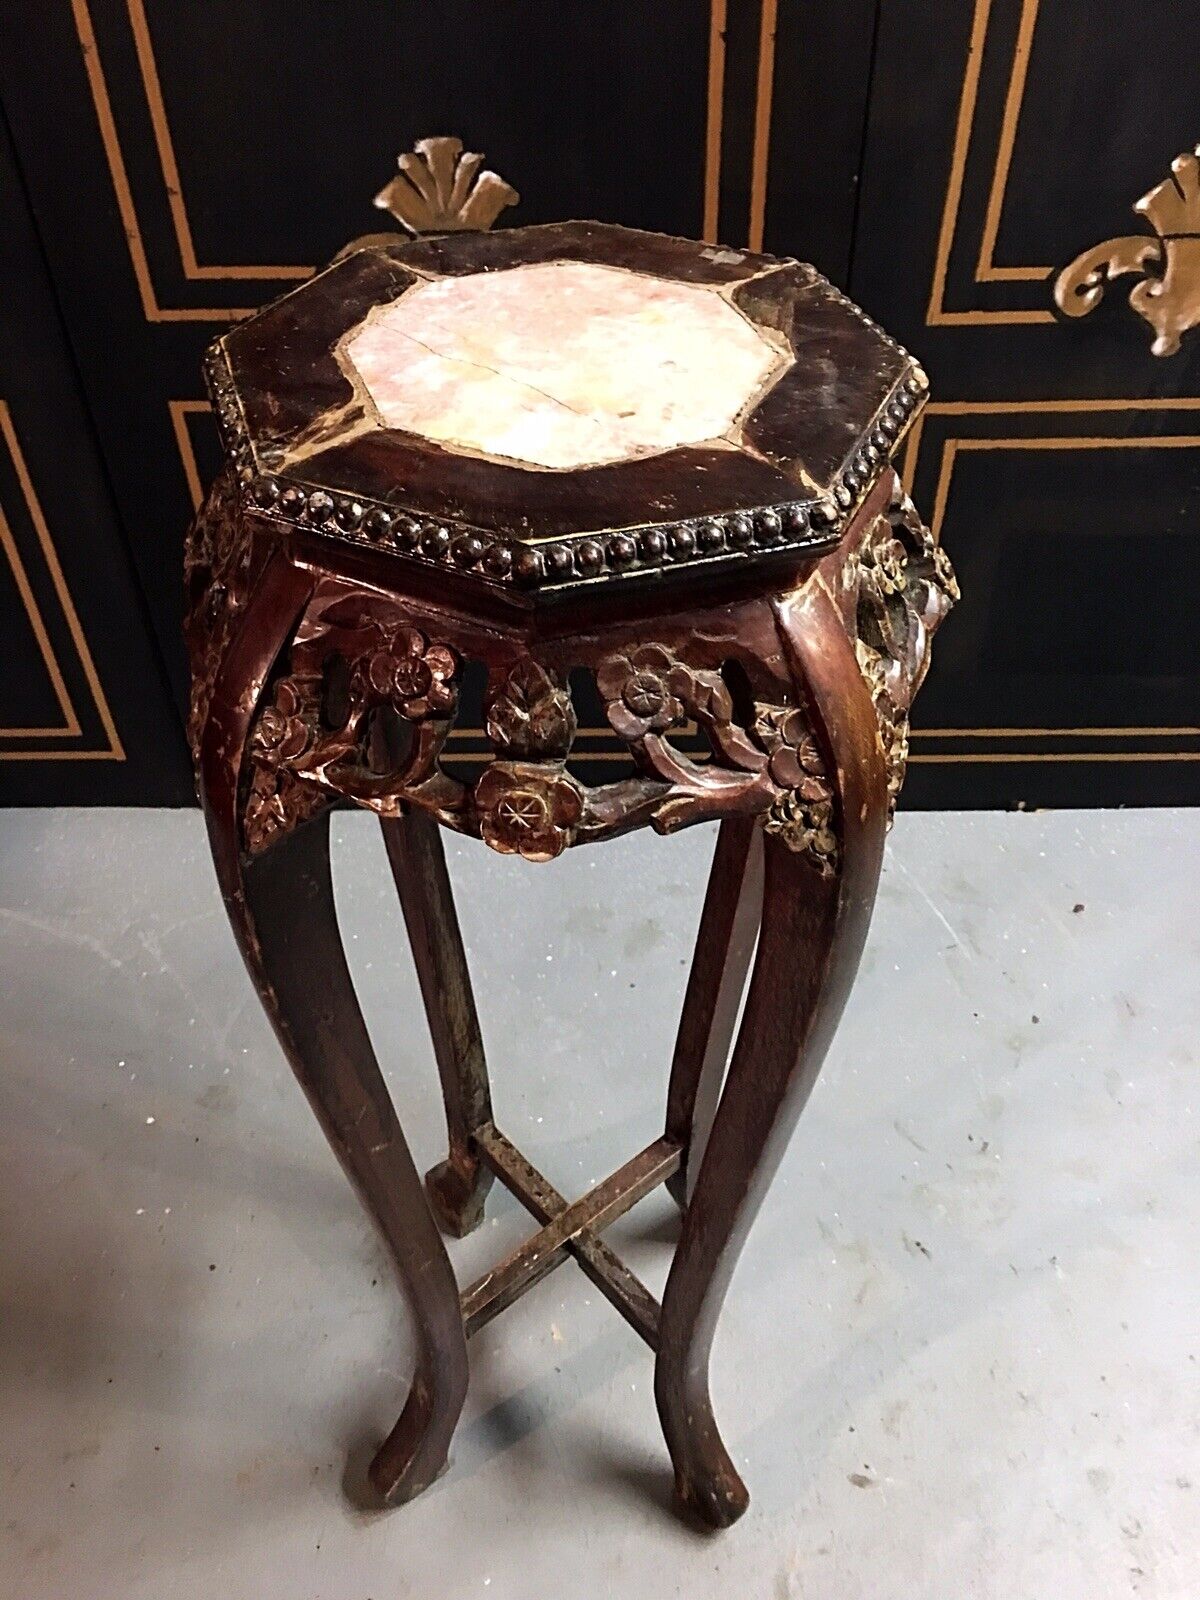 Chinese Antique Carved Rosewood Pedestal Table Без бренда - фотография #3